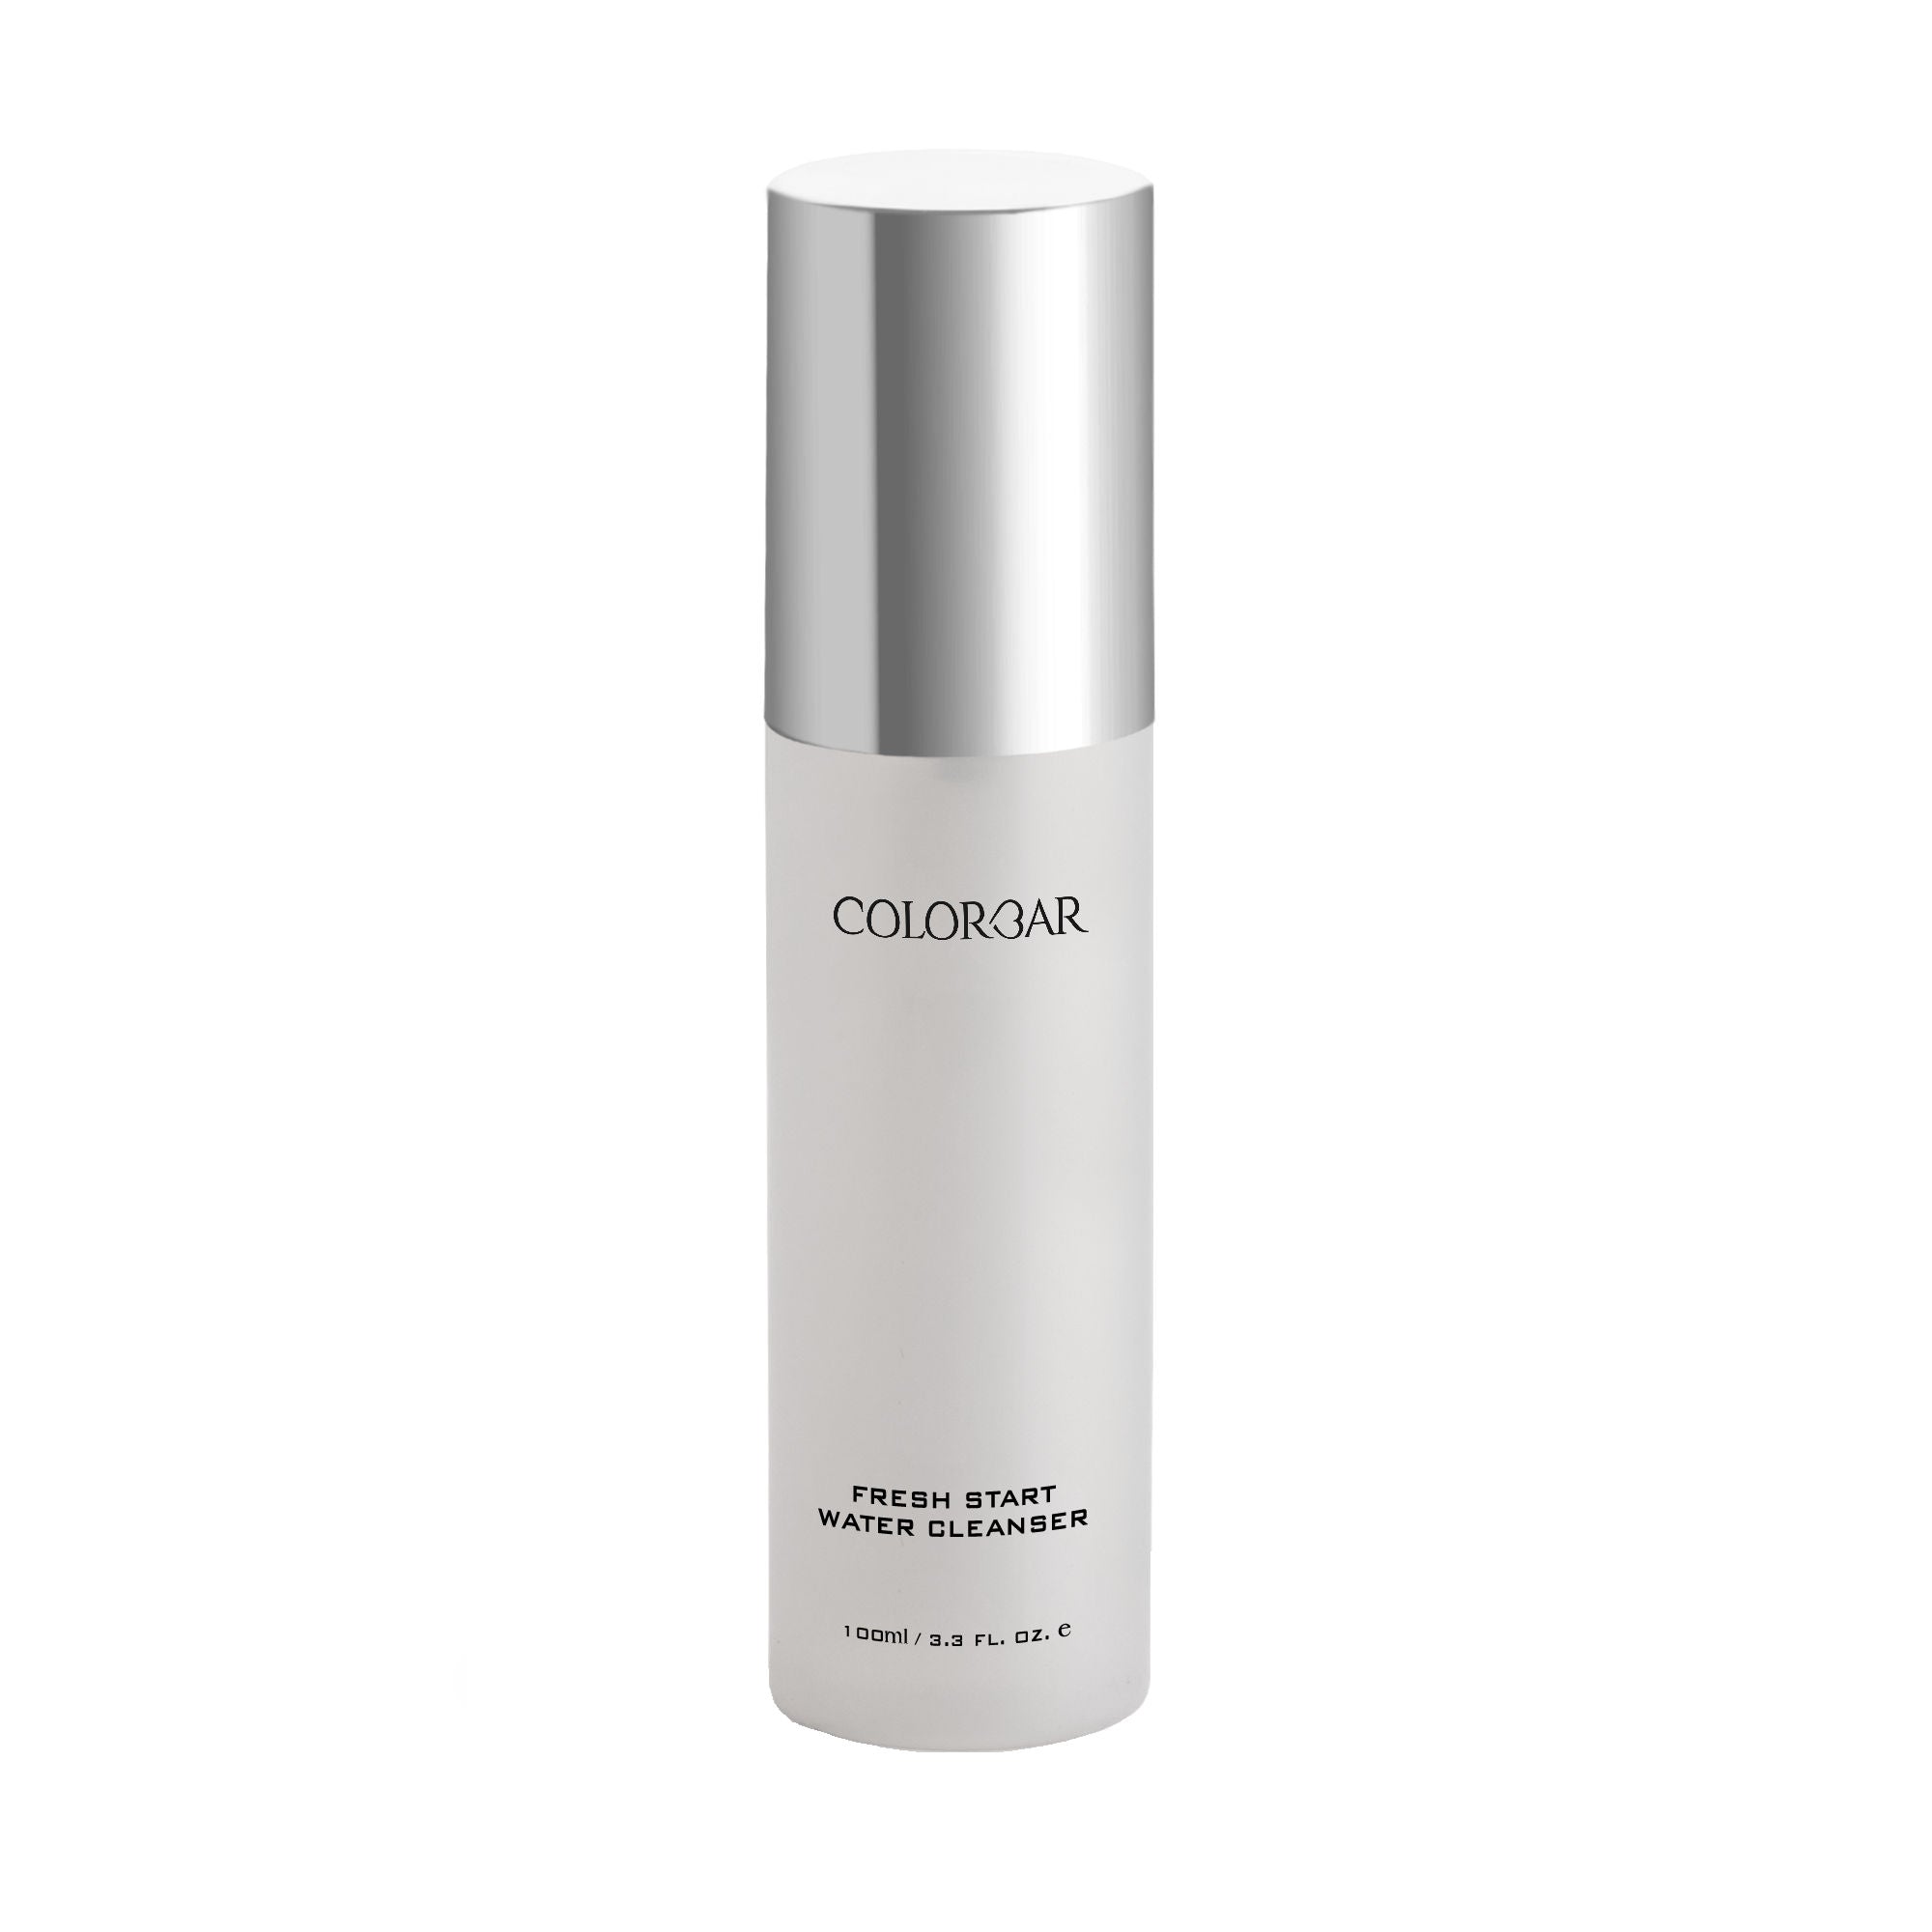 Colorbar Fresh Start Water Cleanser (100ml) Colorbar